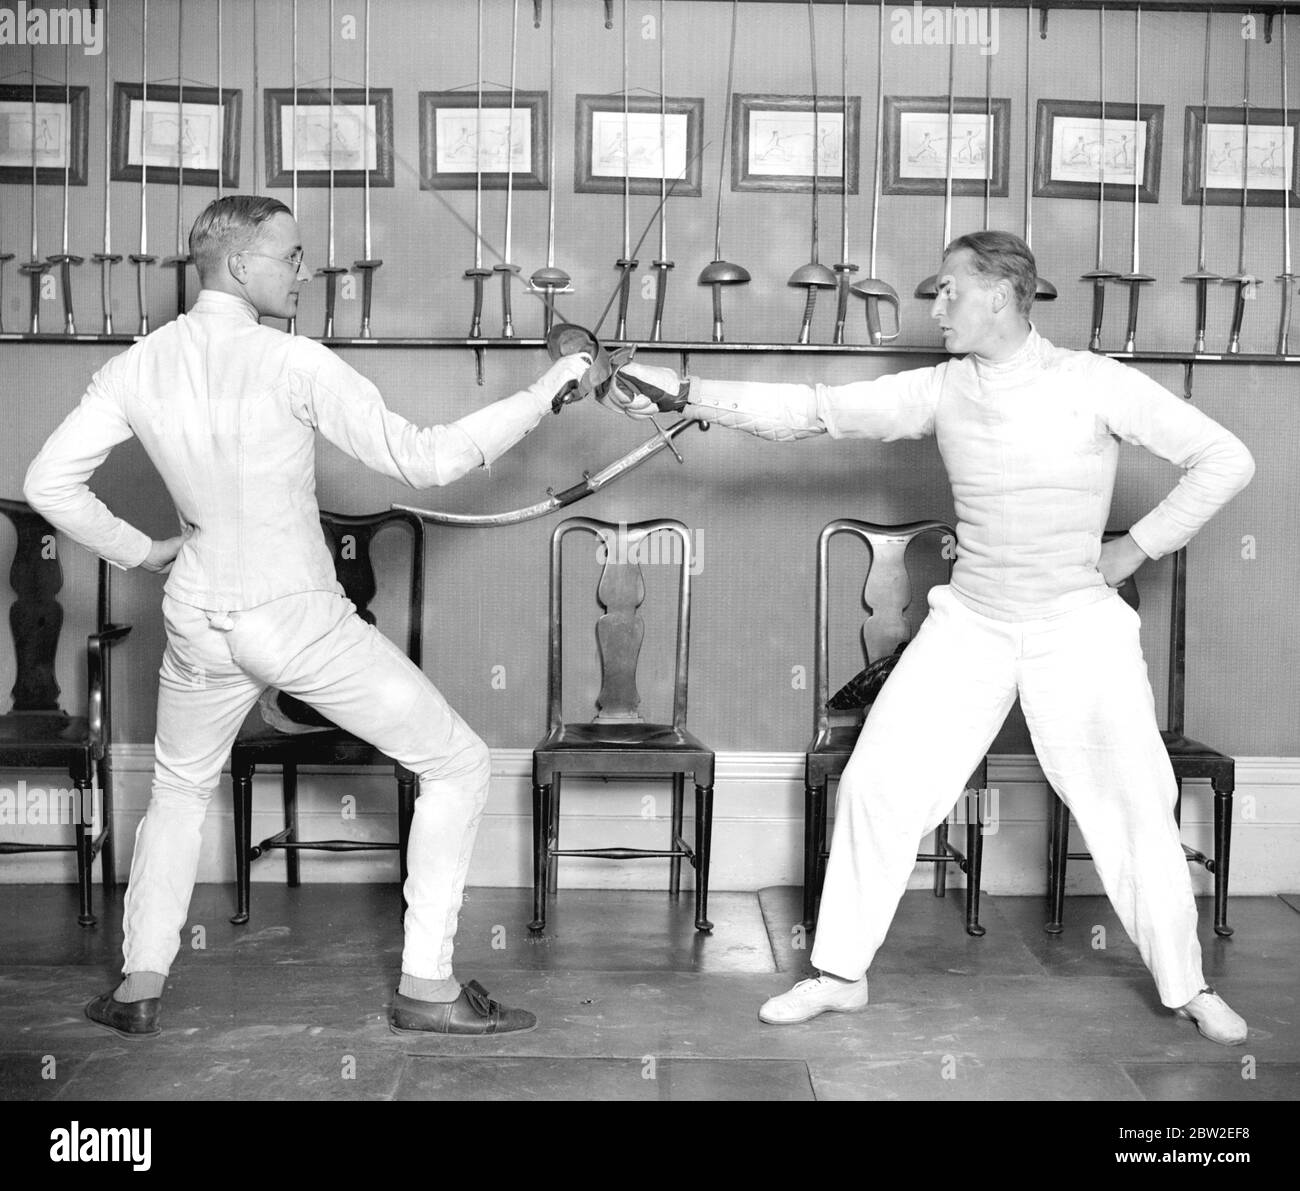 Prince Olaf of Norway (right) taking part in the Oxford V Royal Navy fencing Tournament at Capt Filex Grave's fencing school. 14 November 1924 Stock Photo